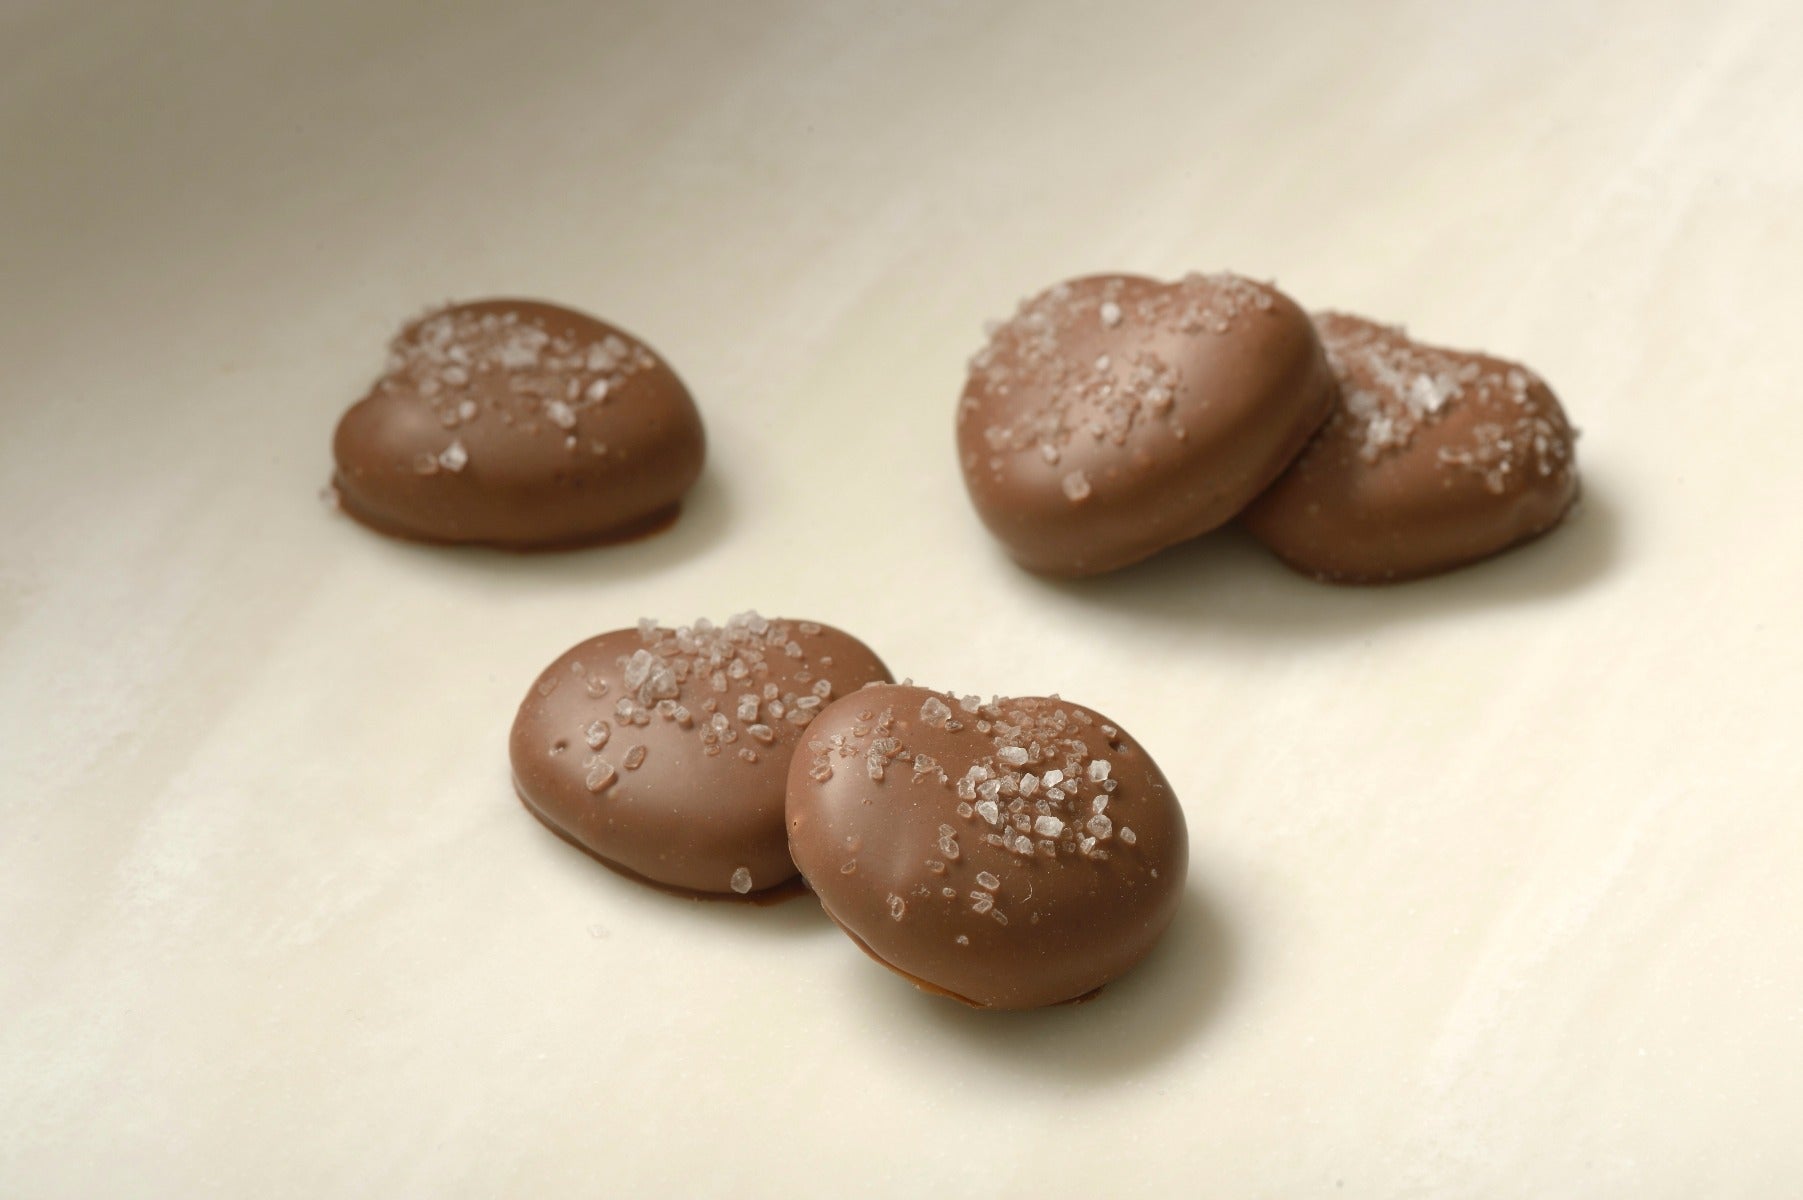 Mini pretzels in caramel and milk chocolate with sea salt topping - a sweet and salty delight from  Mueller Chocolate Co.